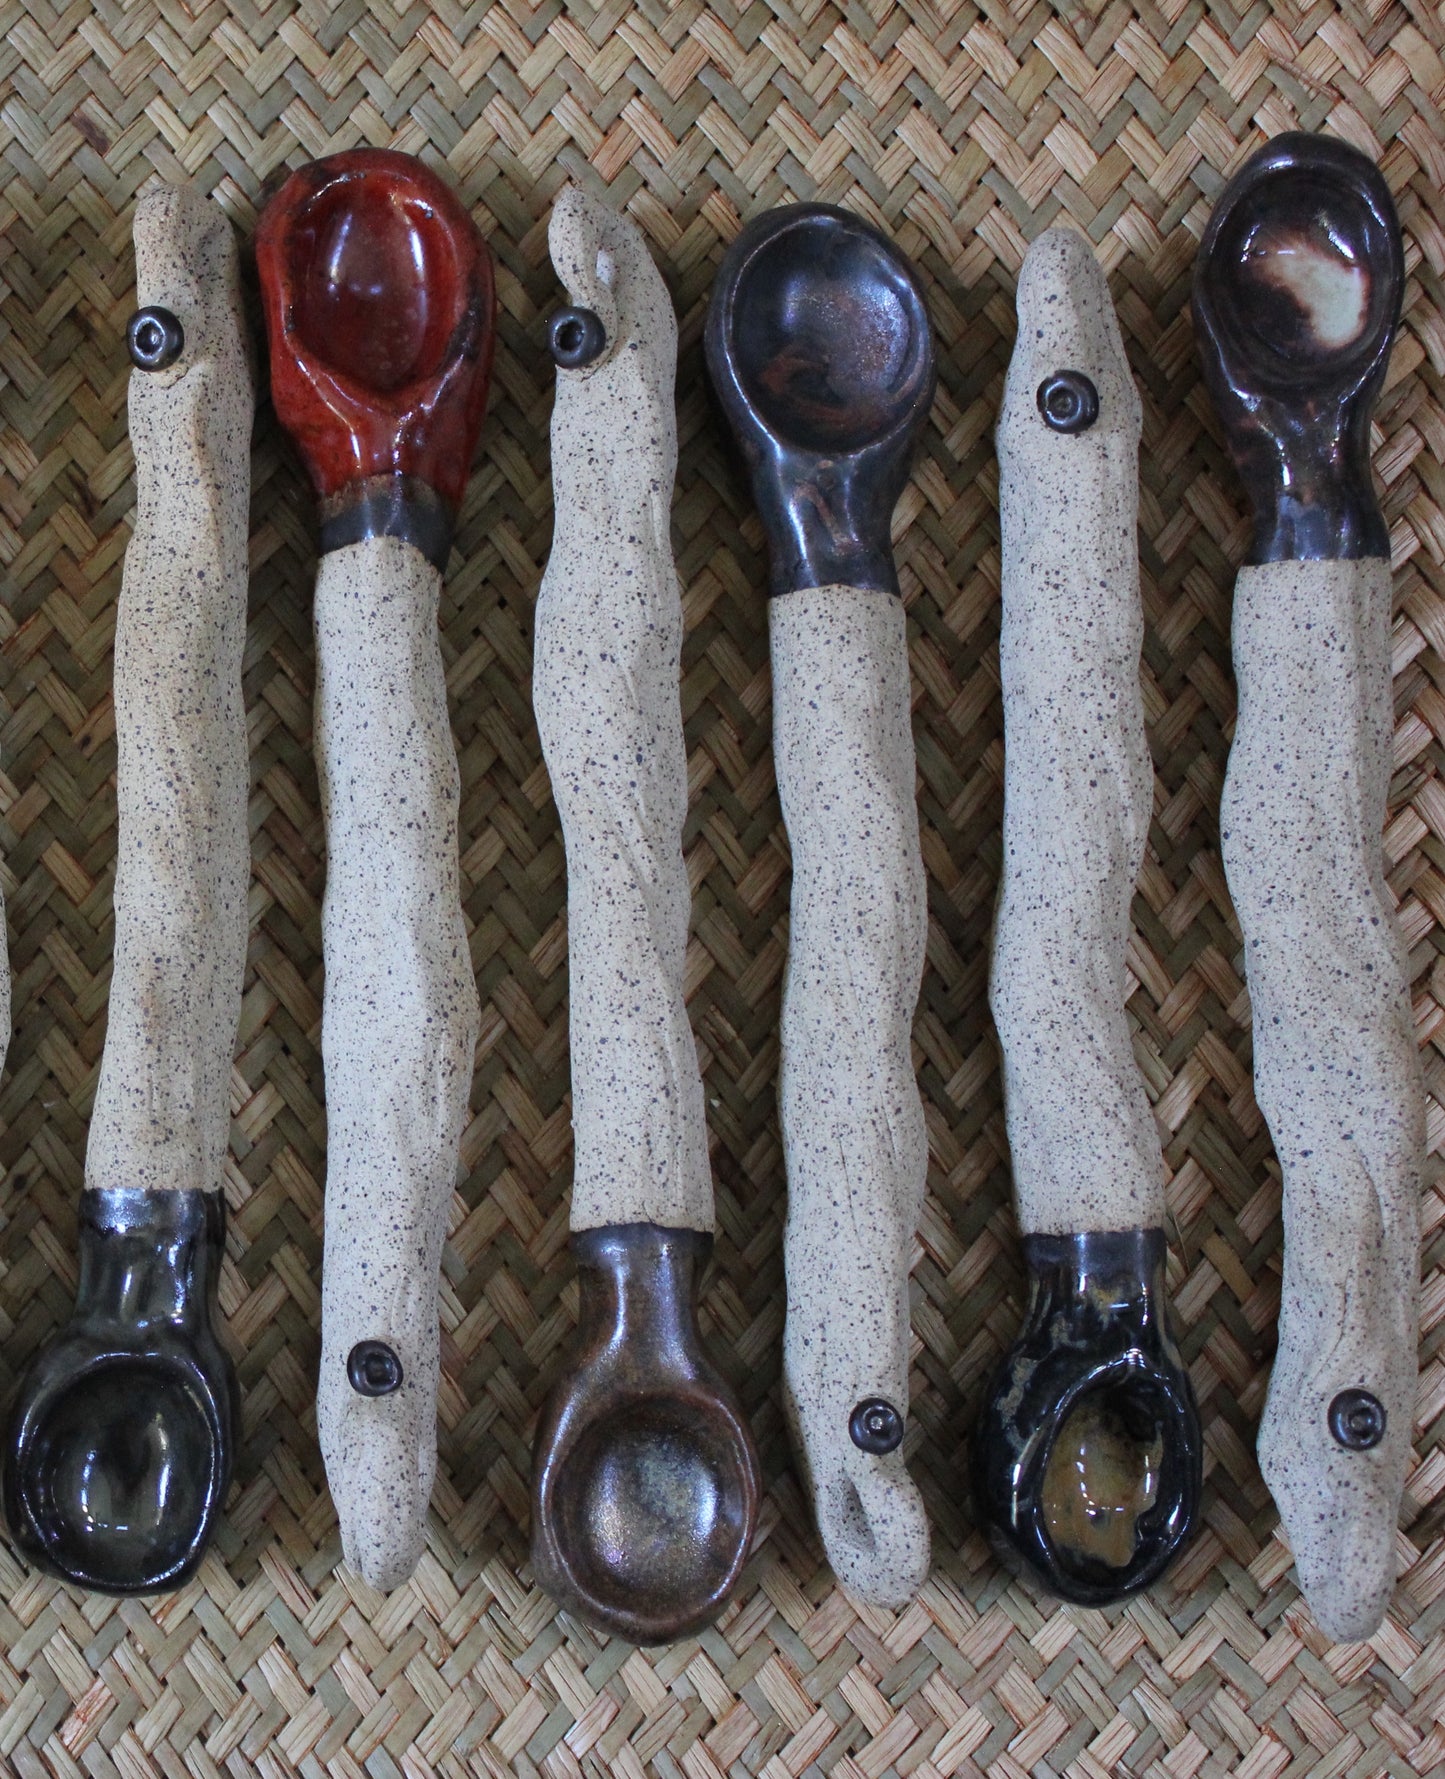 Earthy Ceramic Copper-Brown Serving Spoon as a Unique Ornament or for Food Consumption